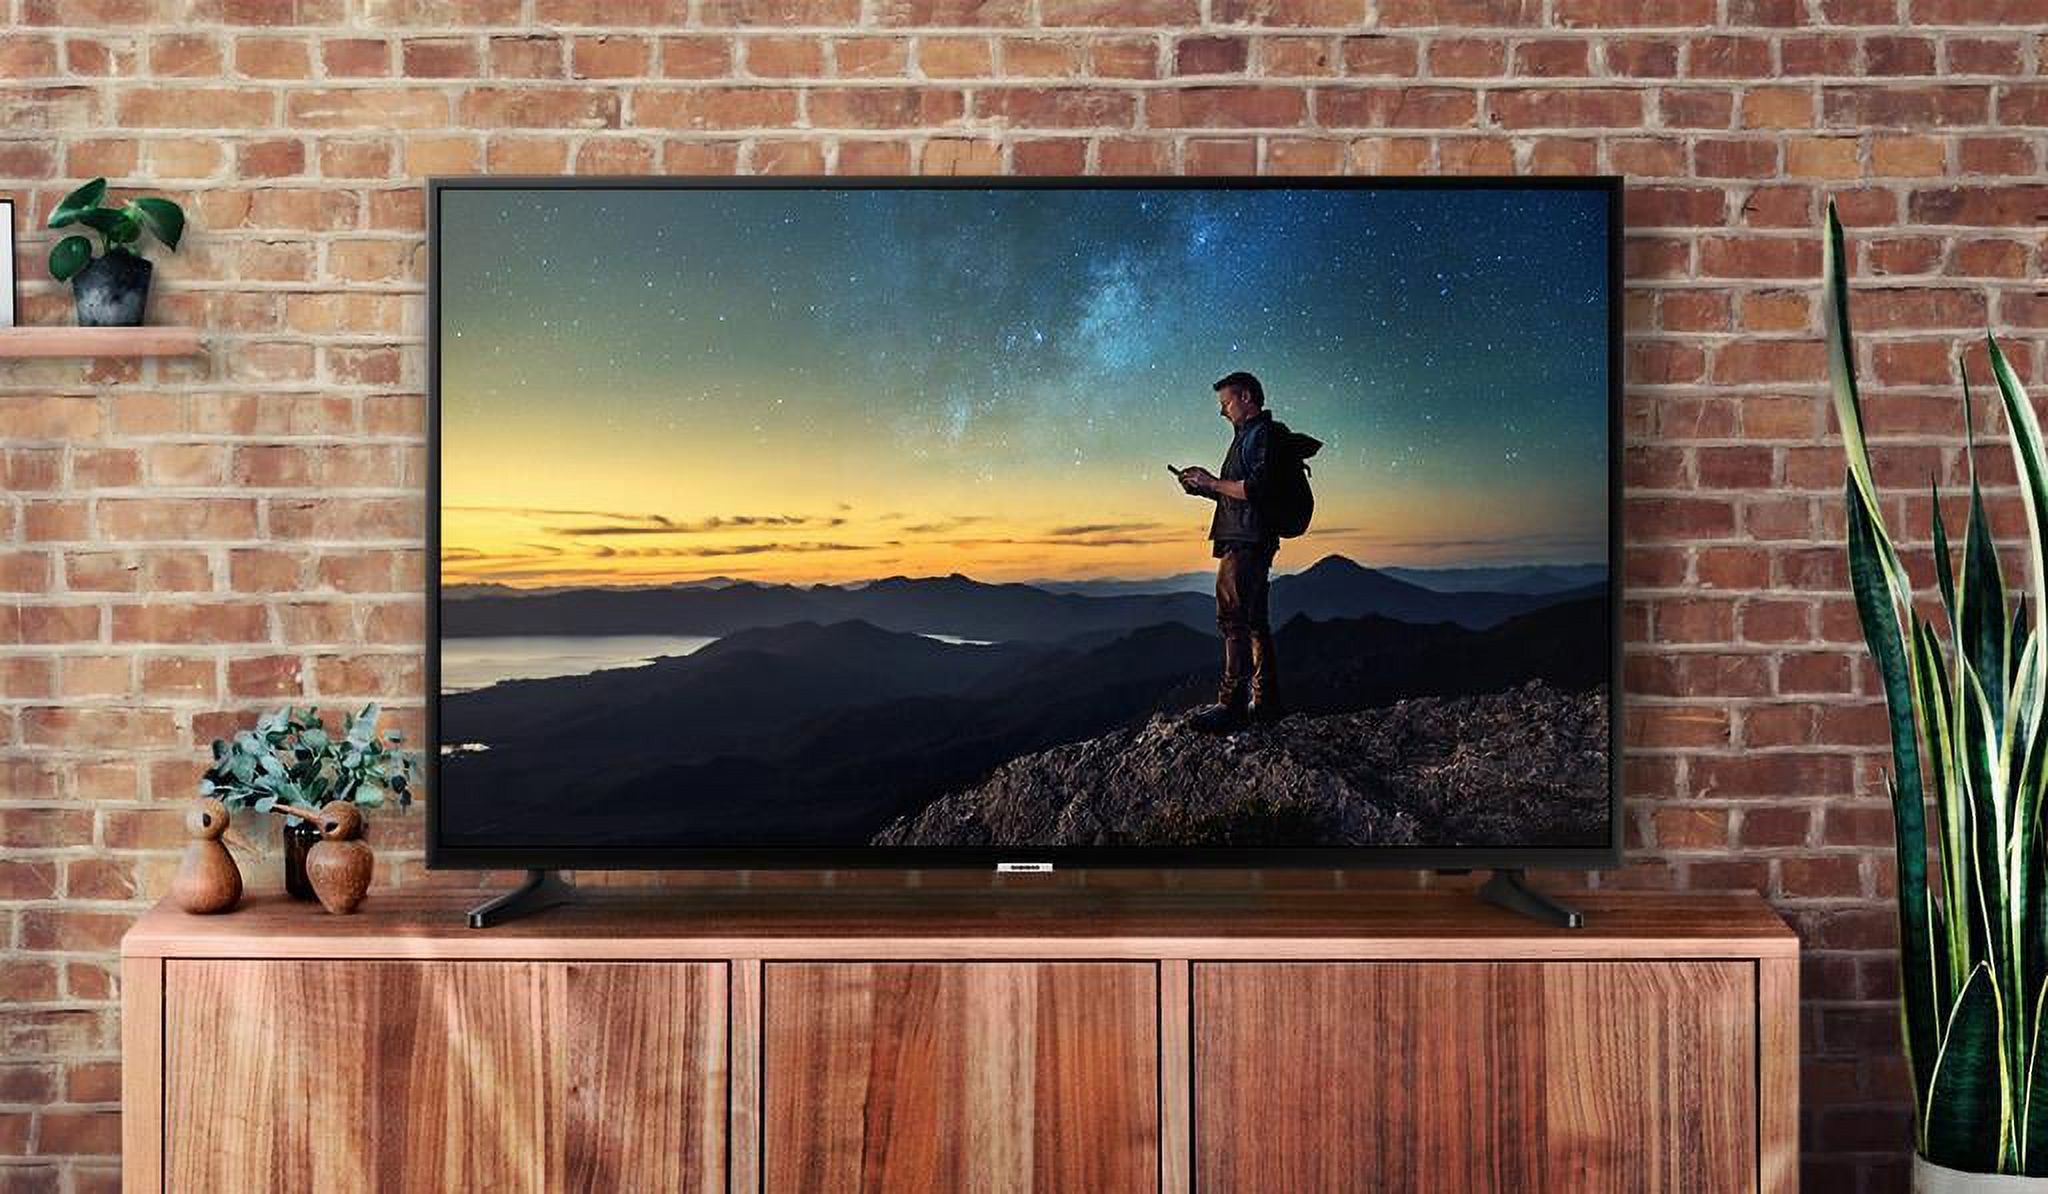 SAMSUNG 65" Class 4K UHD 2160p LED Smart TV with HDR UN65NU6900 - image 17 of 20